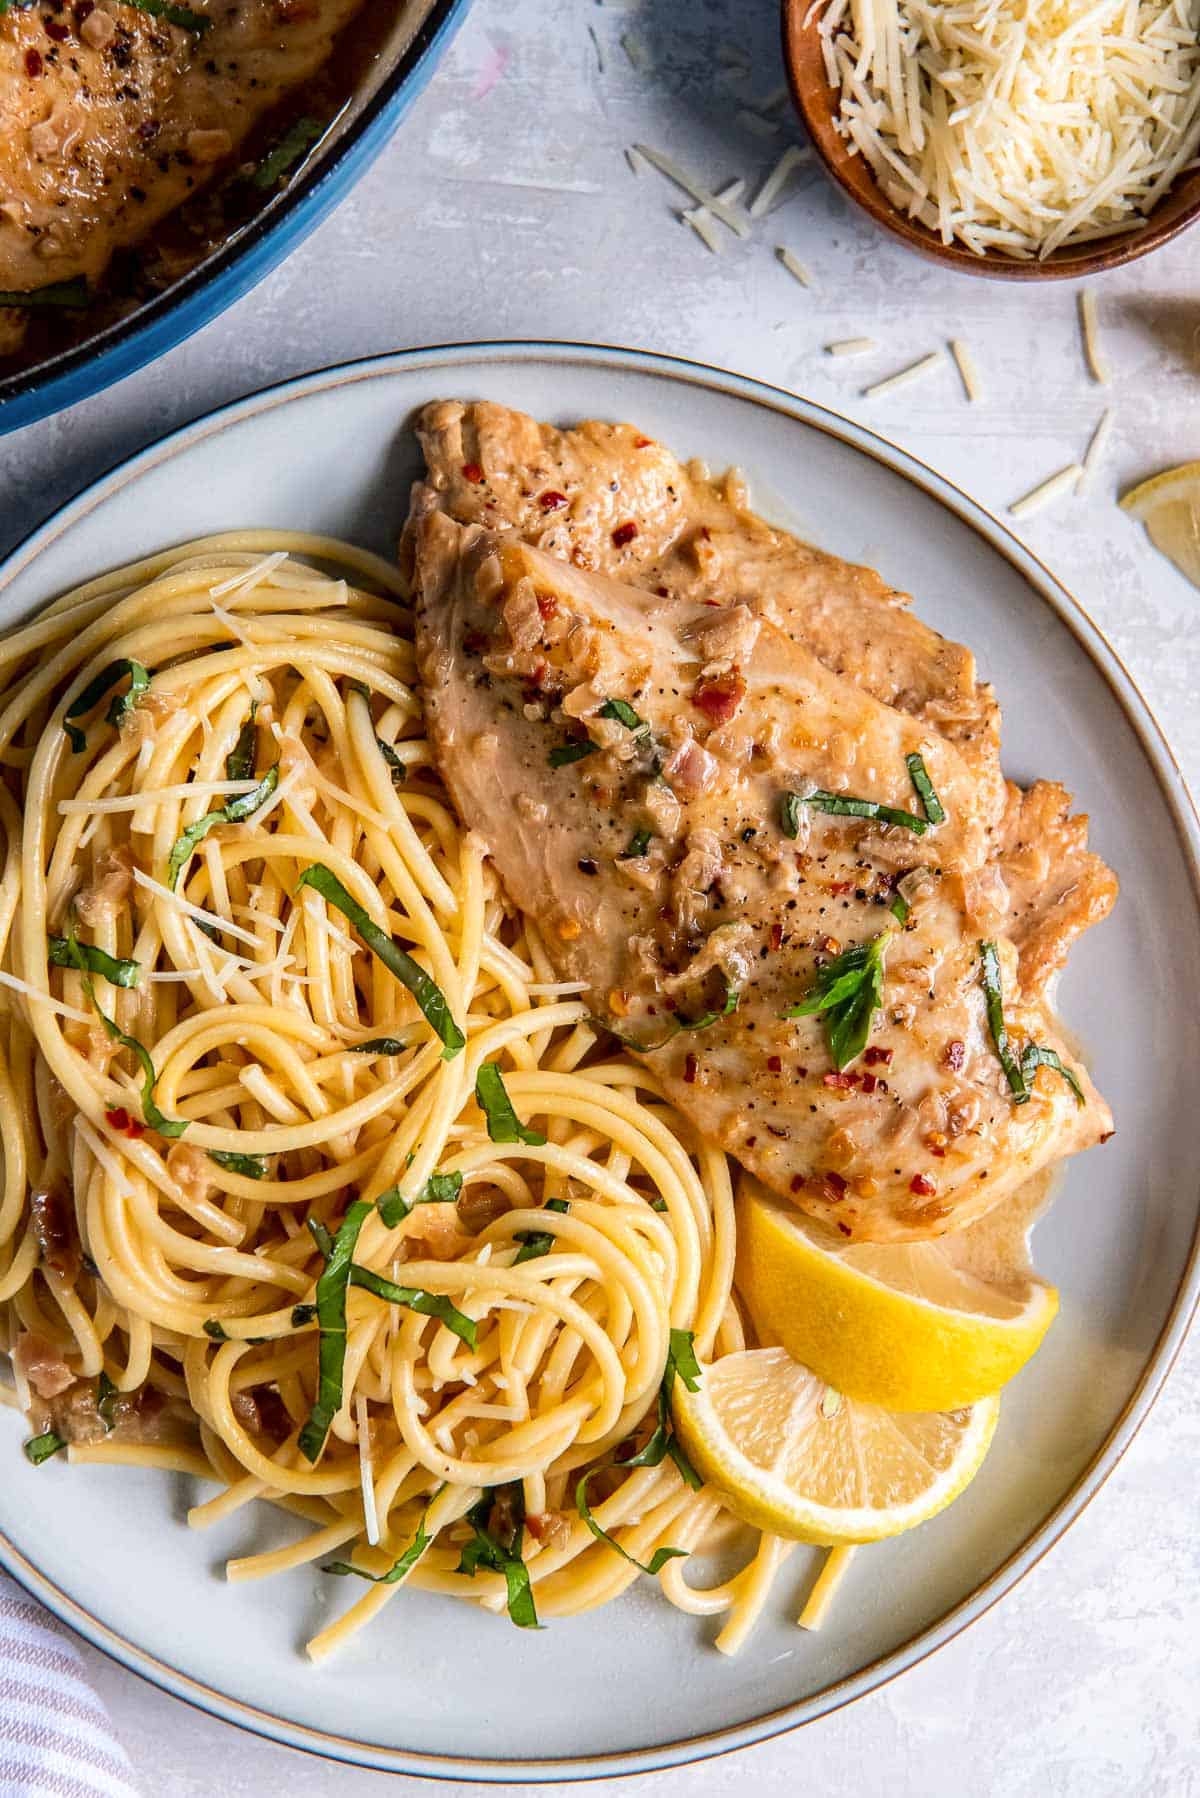 Lemon chicken and pasta on a plate witih lemon wedges.